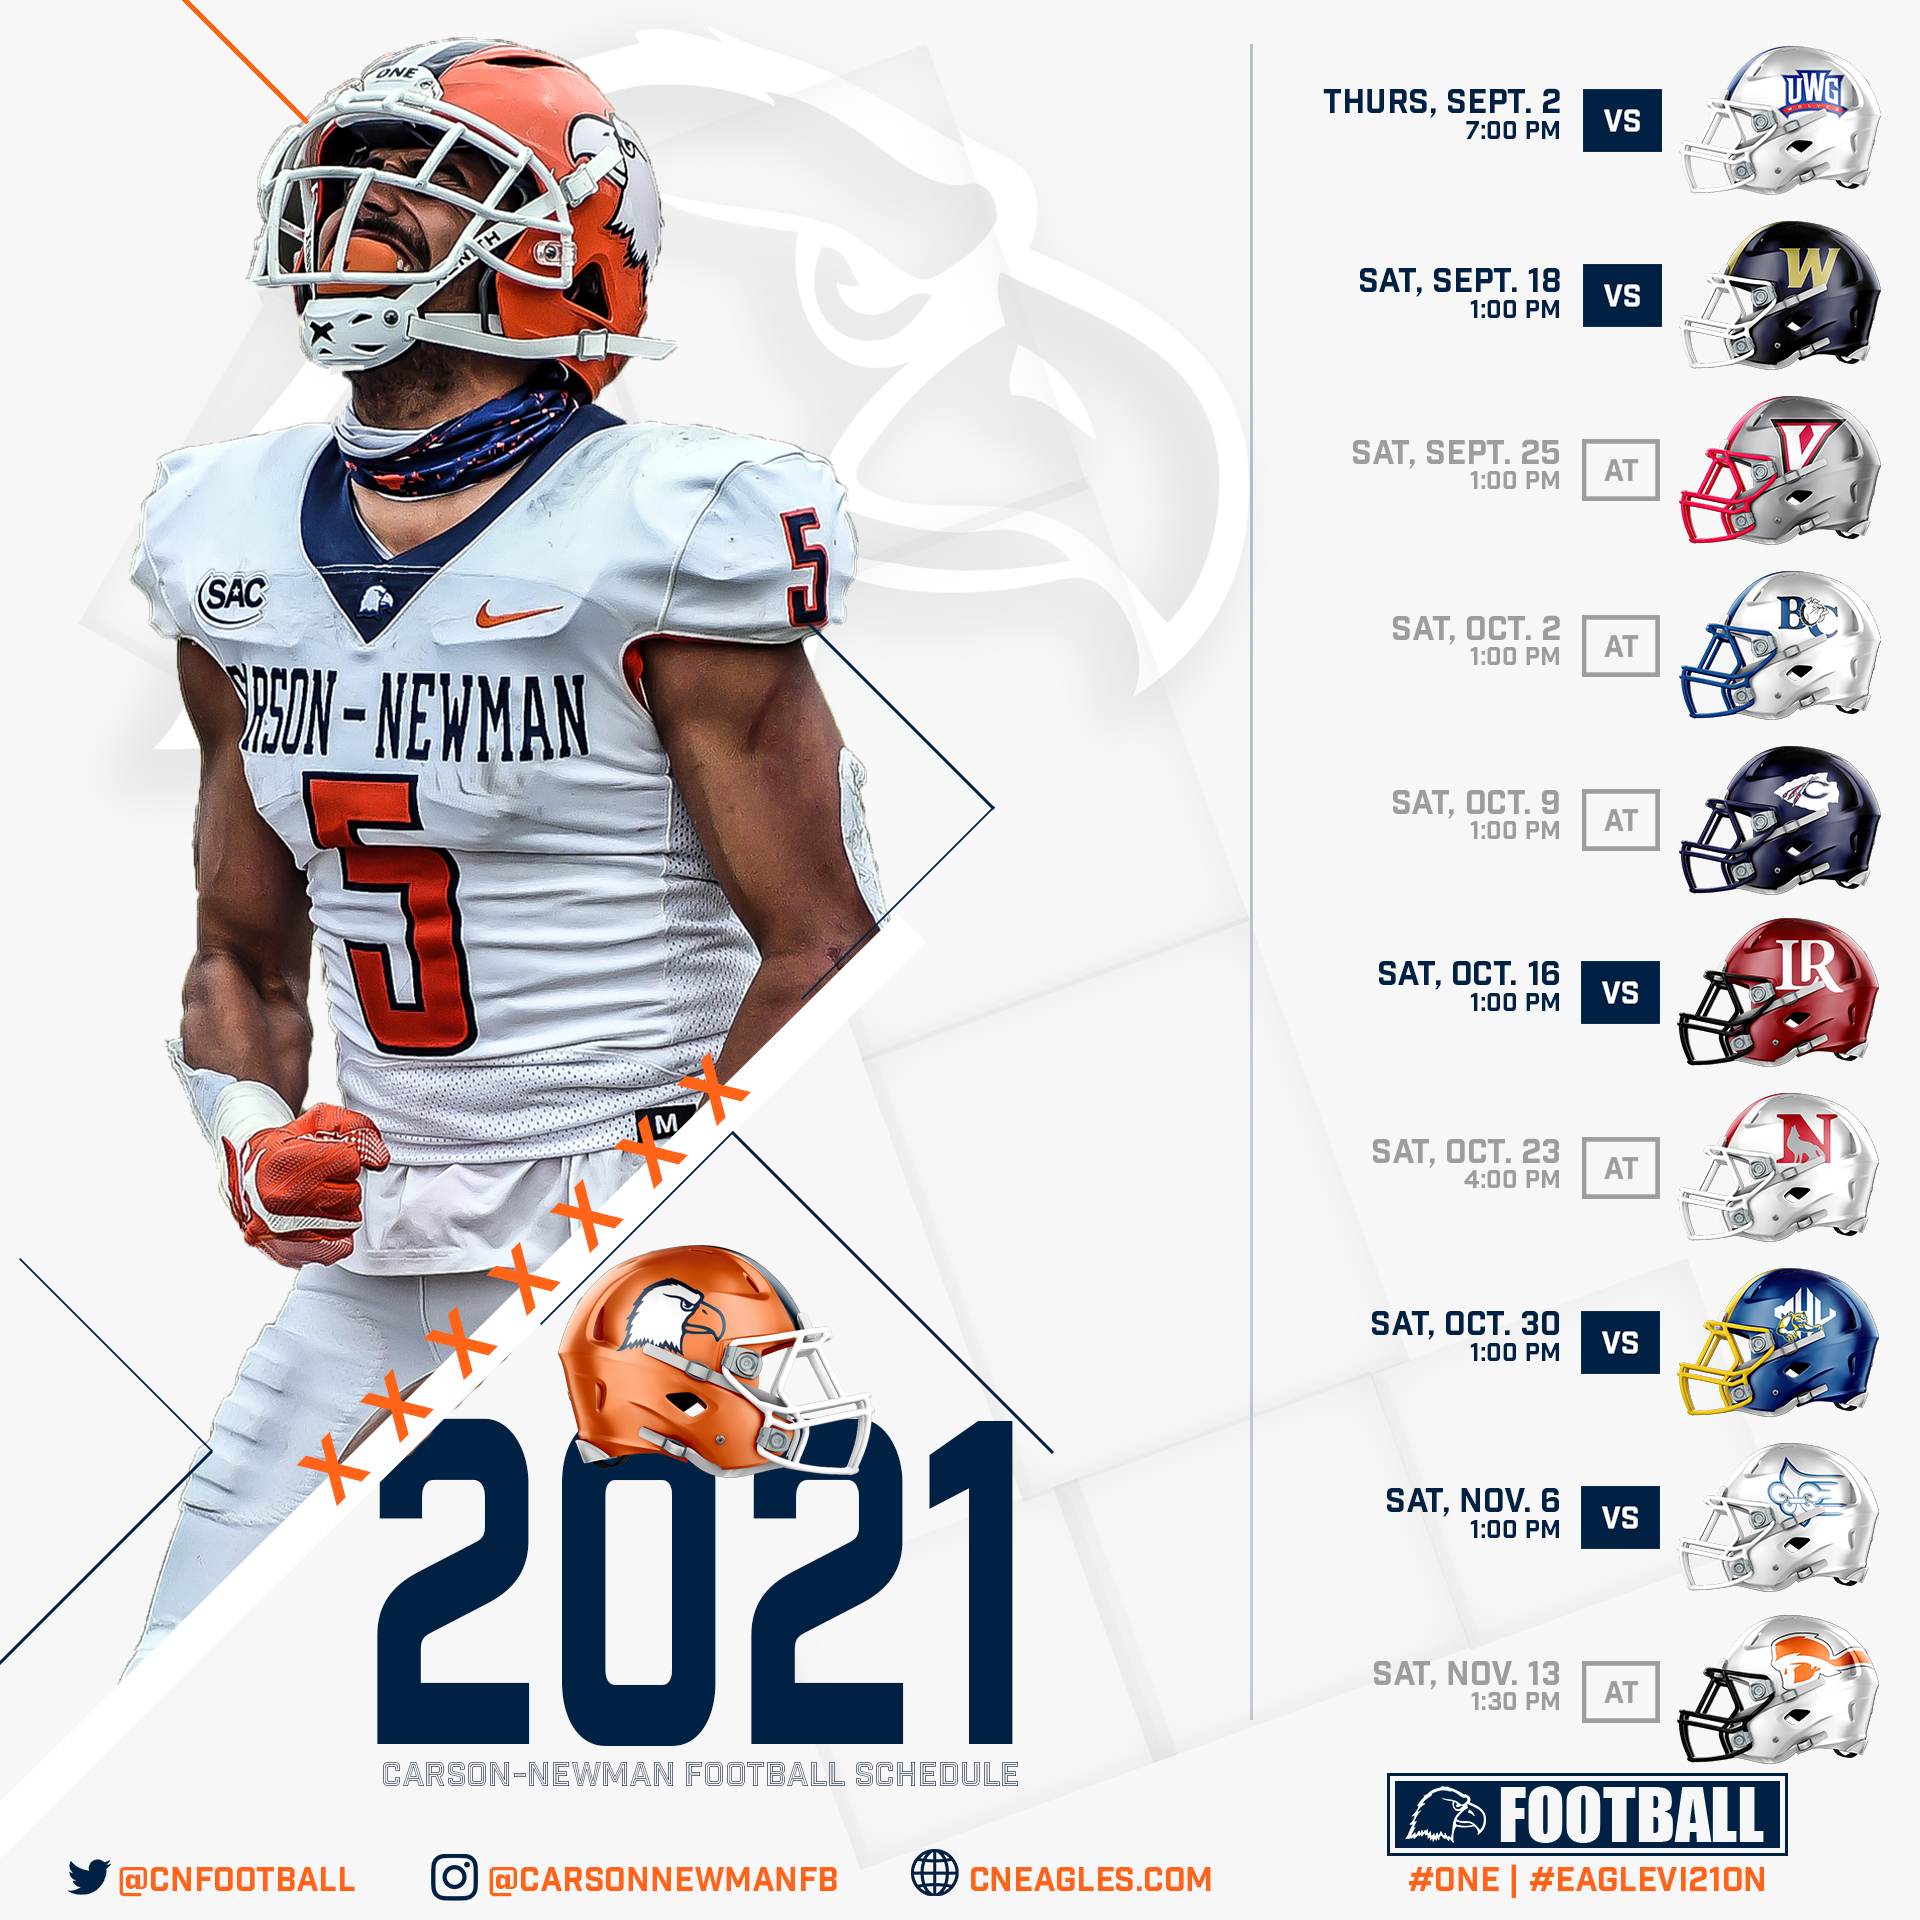 Season Tickets on-sale, promotions unveiled for 2021 Football season